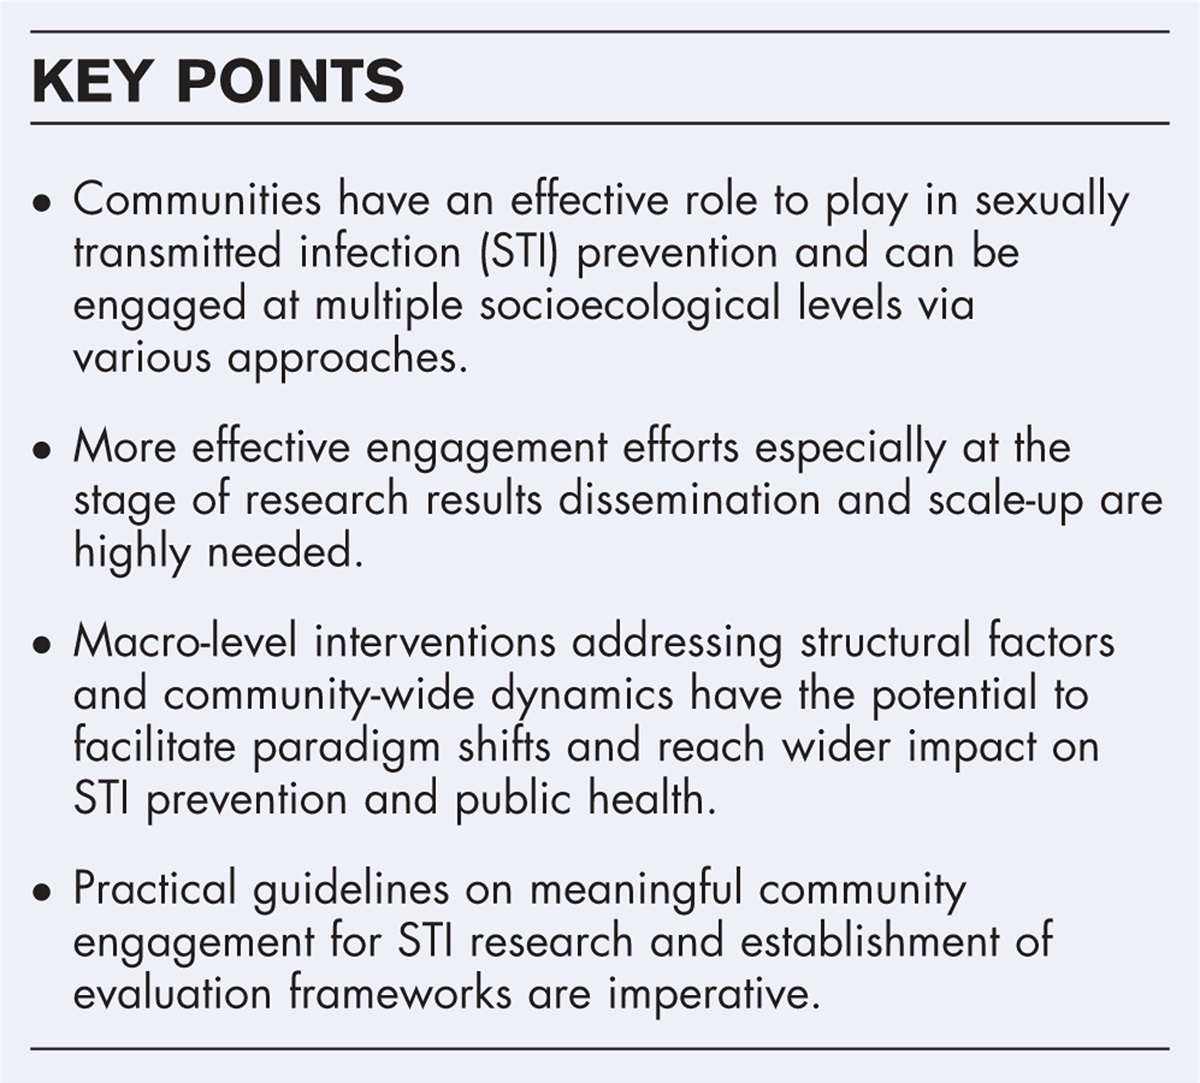 Community engagement tools in HIV/STI prevention research